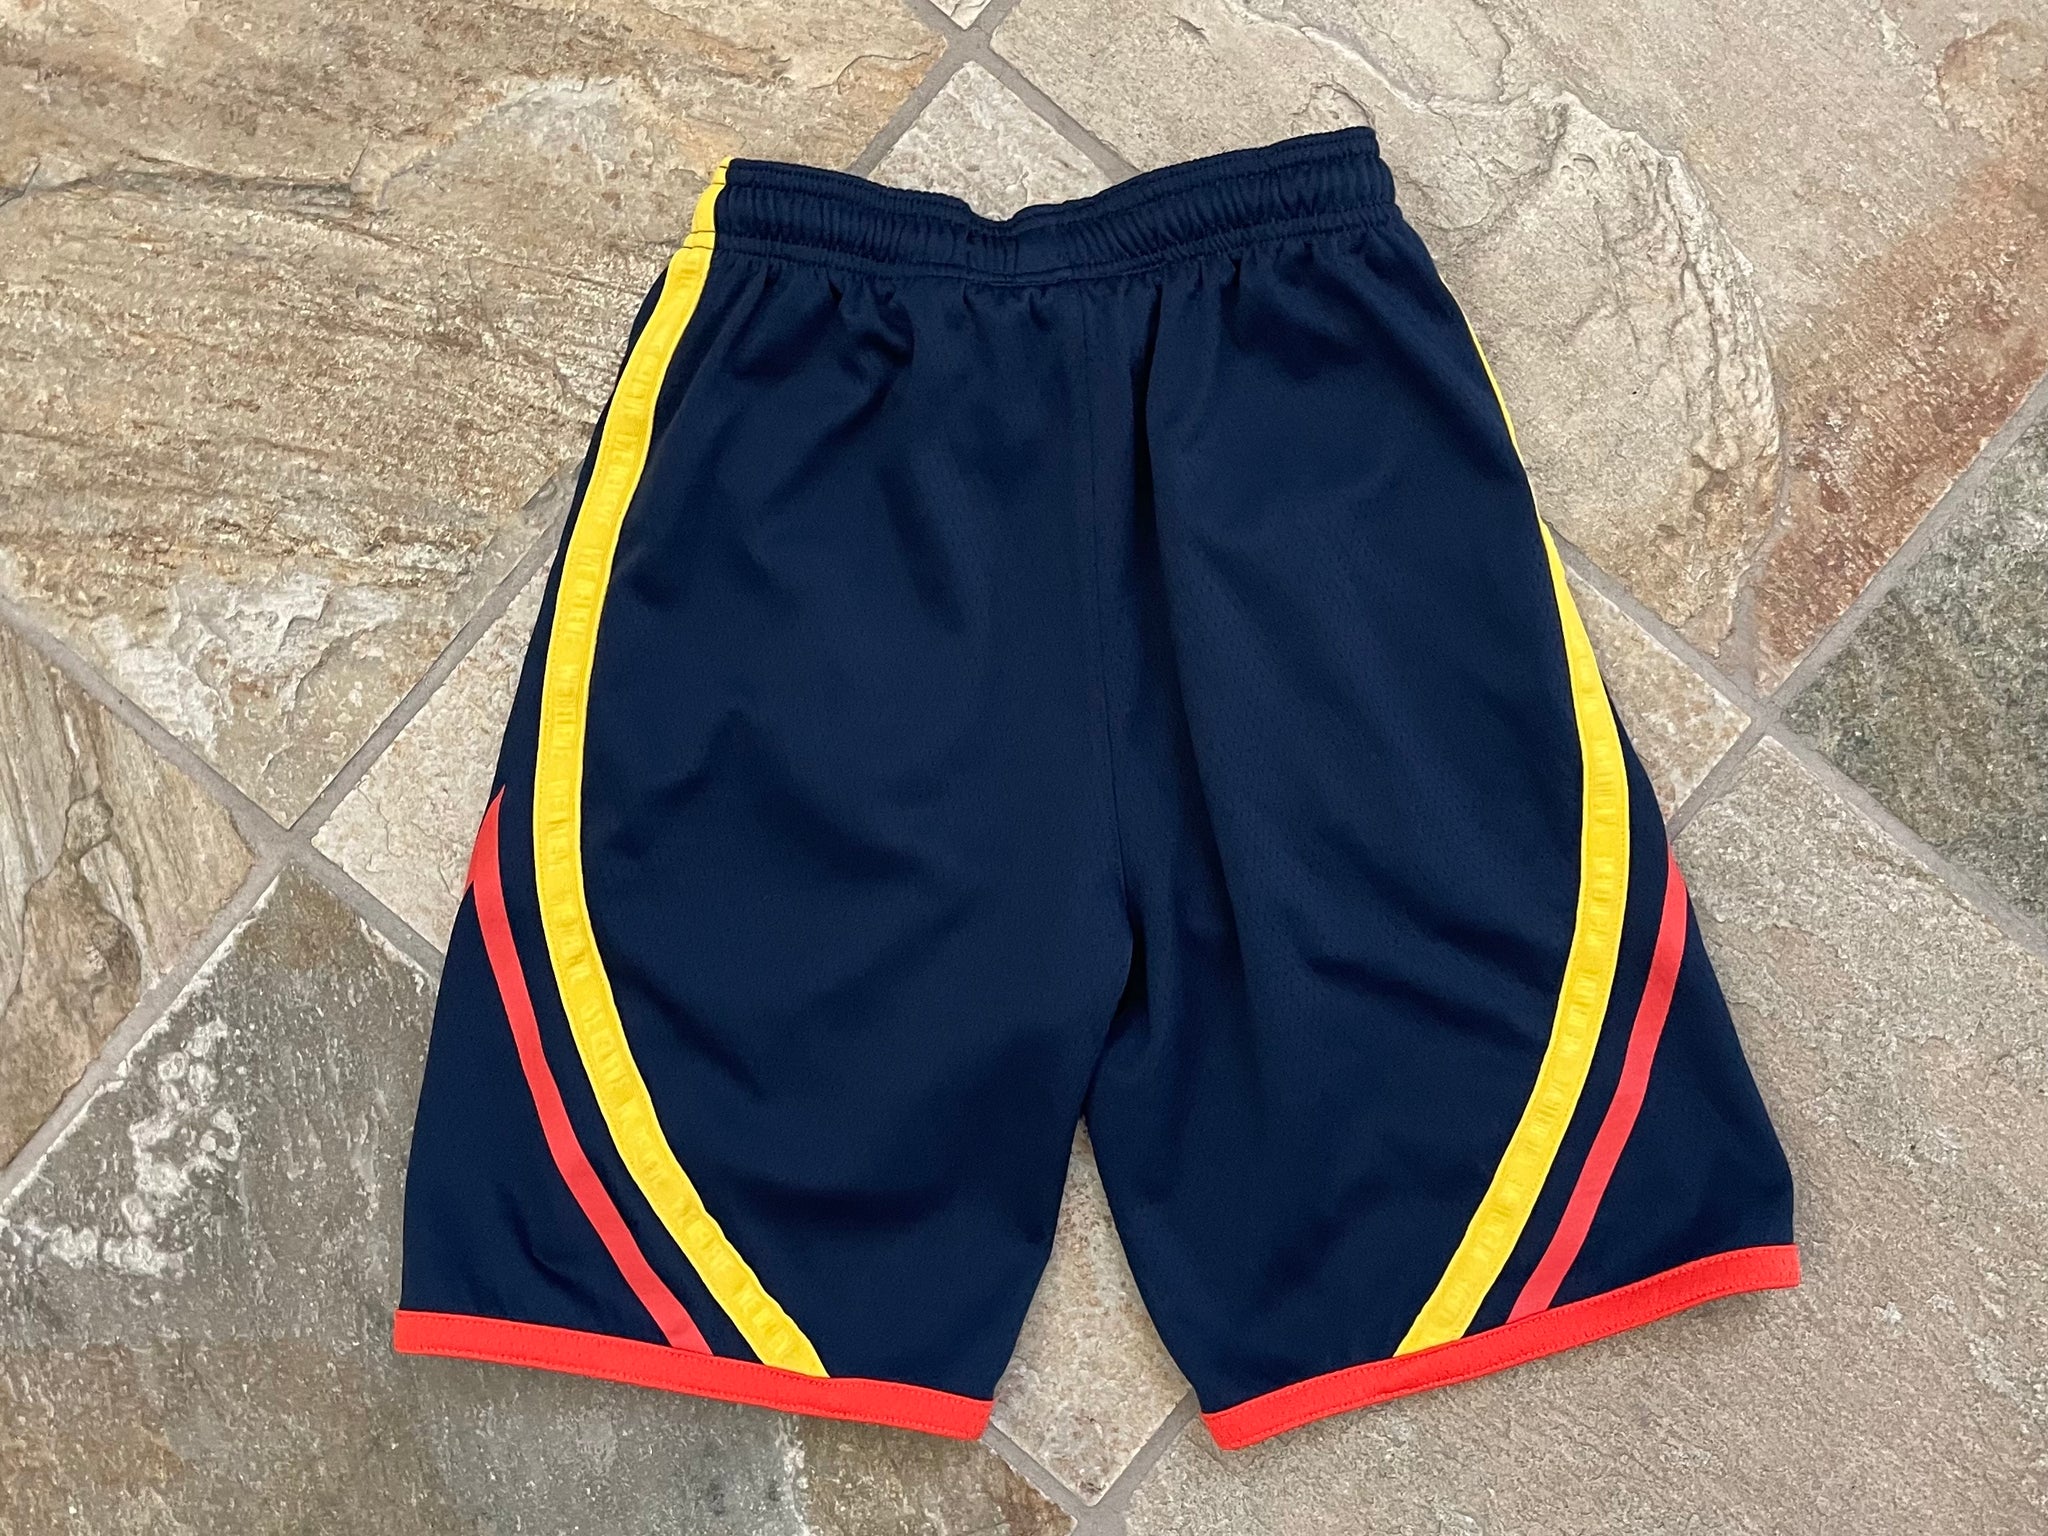 Throwback Golden State Warriors NBA Shorts Size Large for Sale in